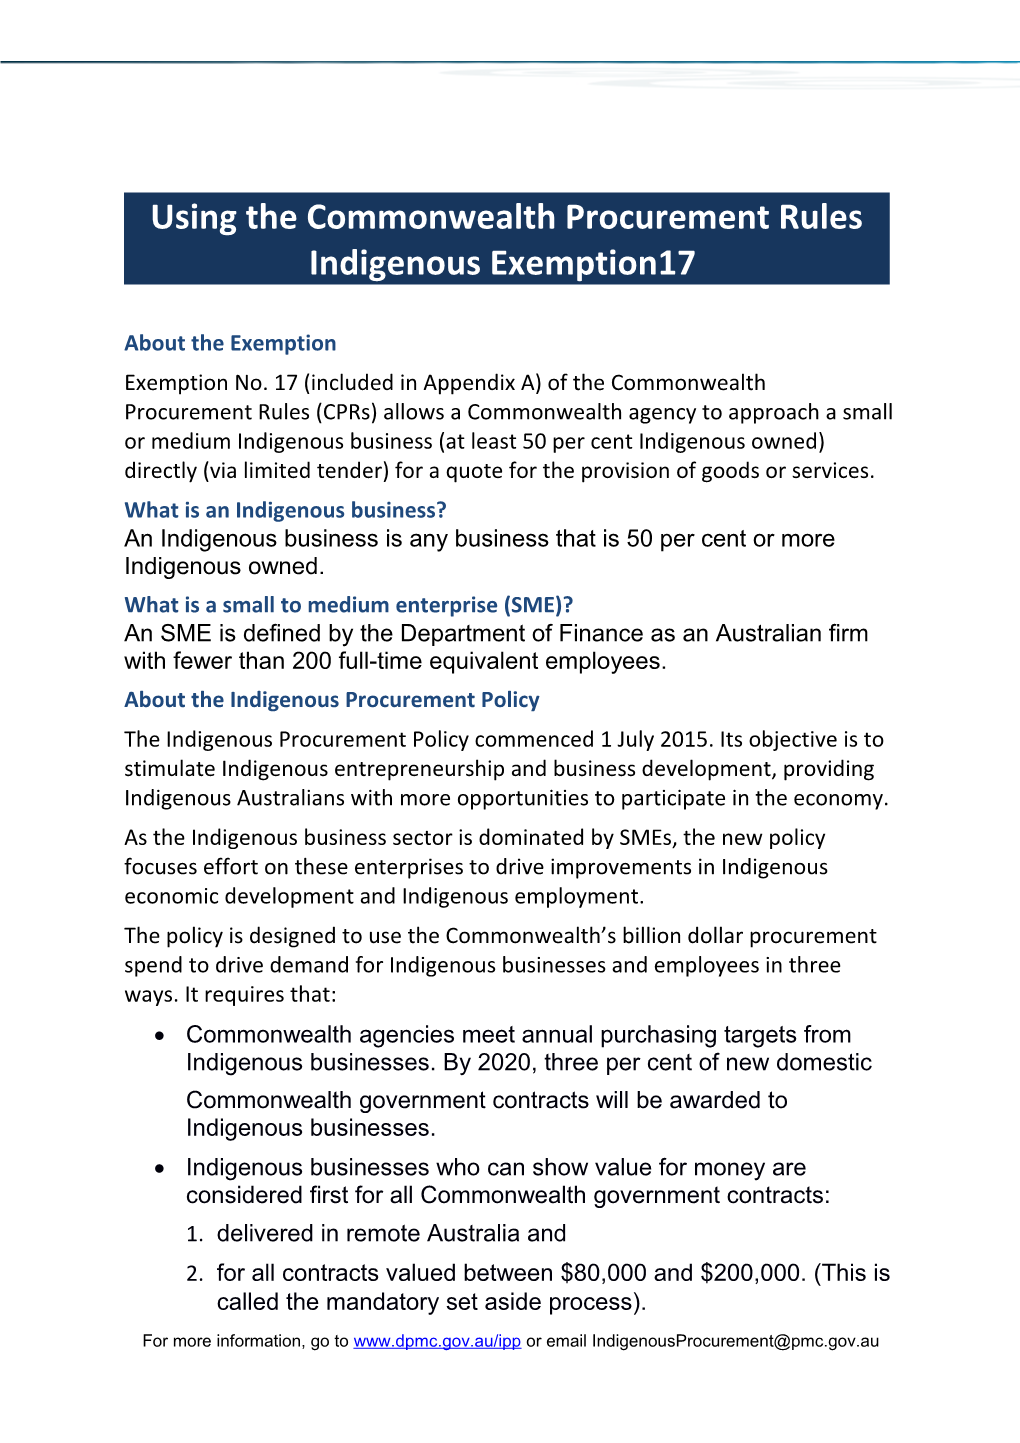 Using the Commonwealth Procurement Rules Indigenous Exemption17